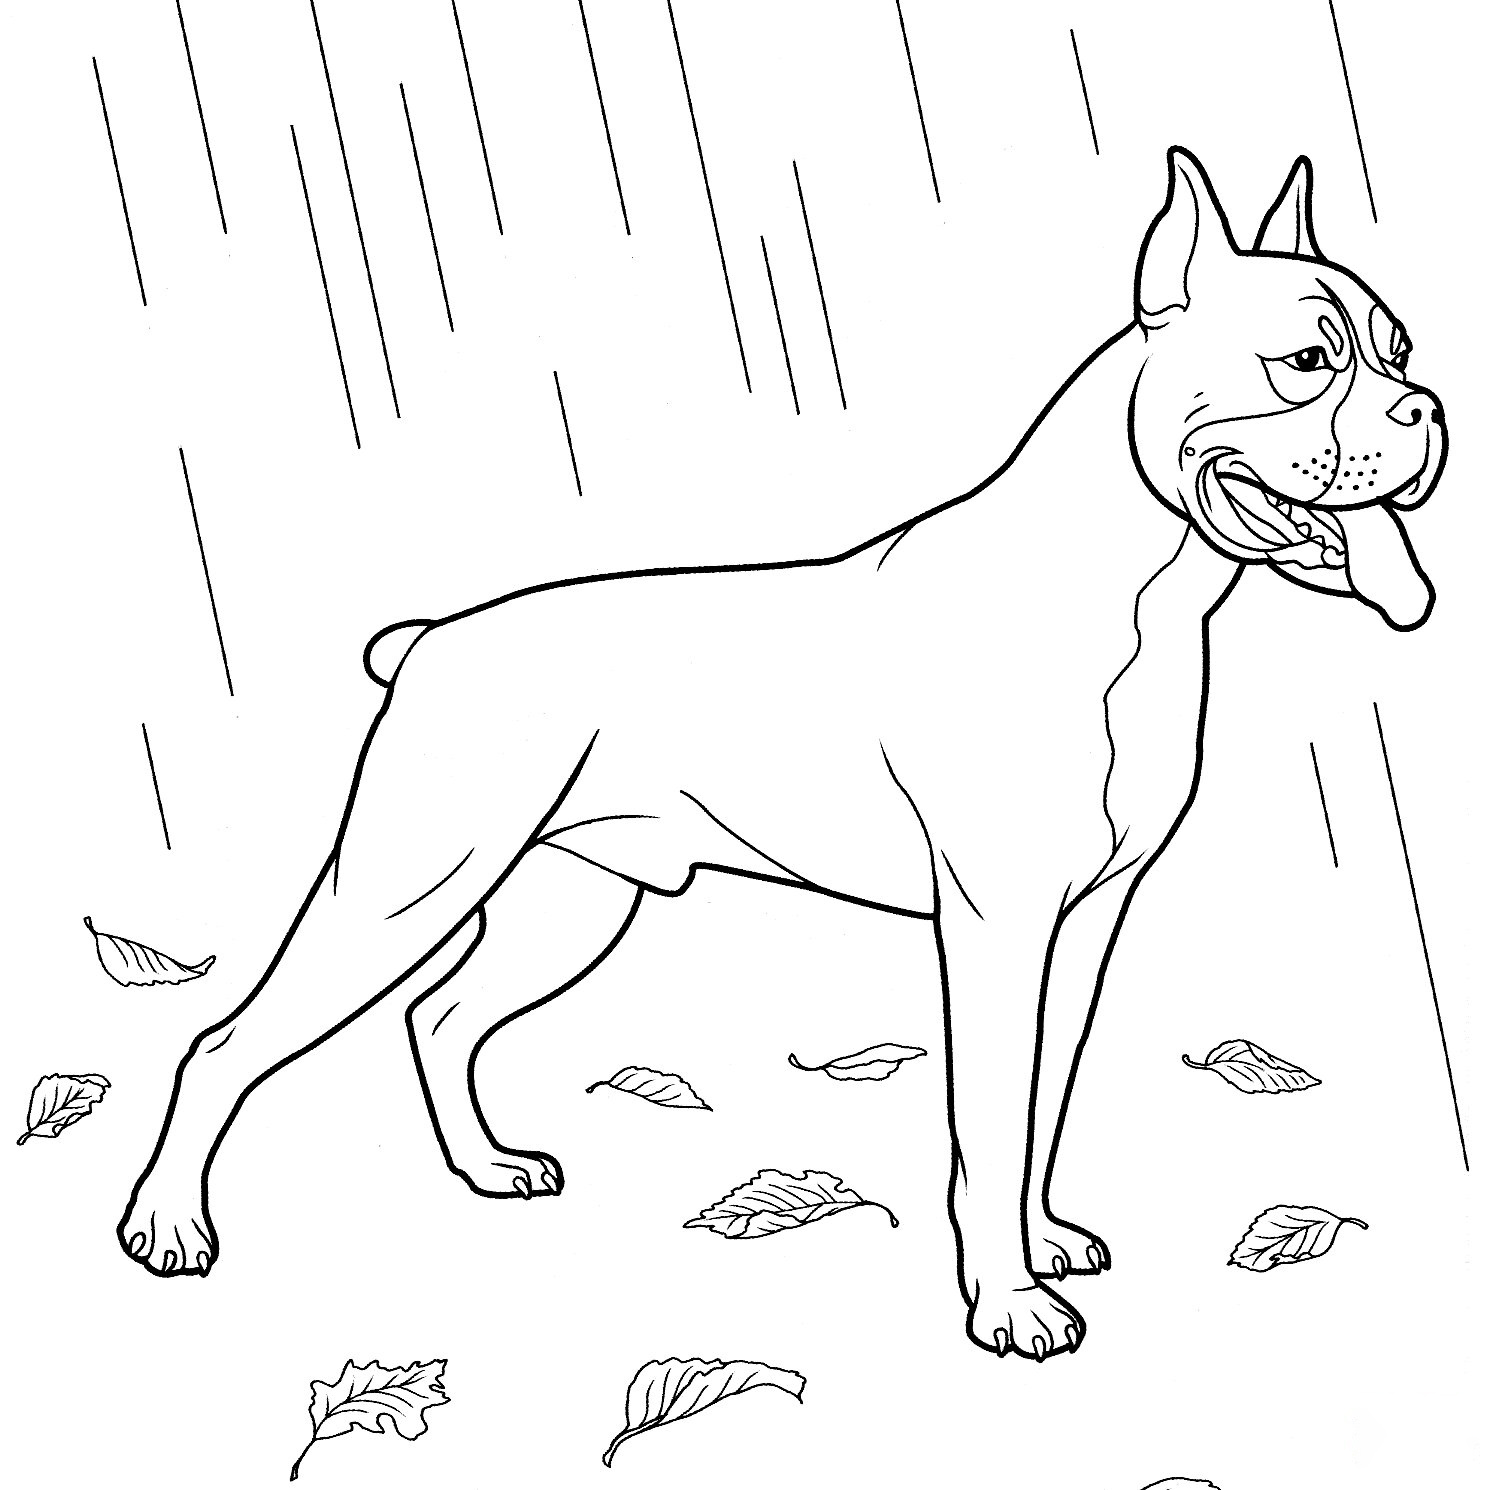 Boxer Coloring Page